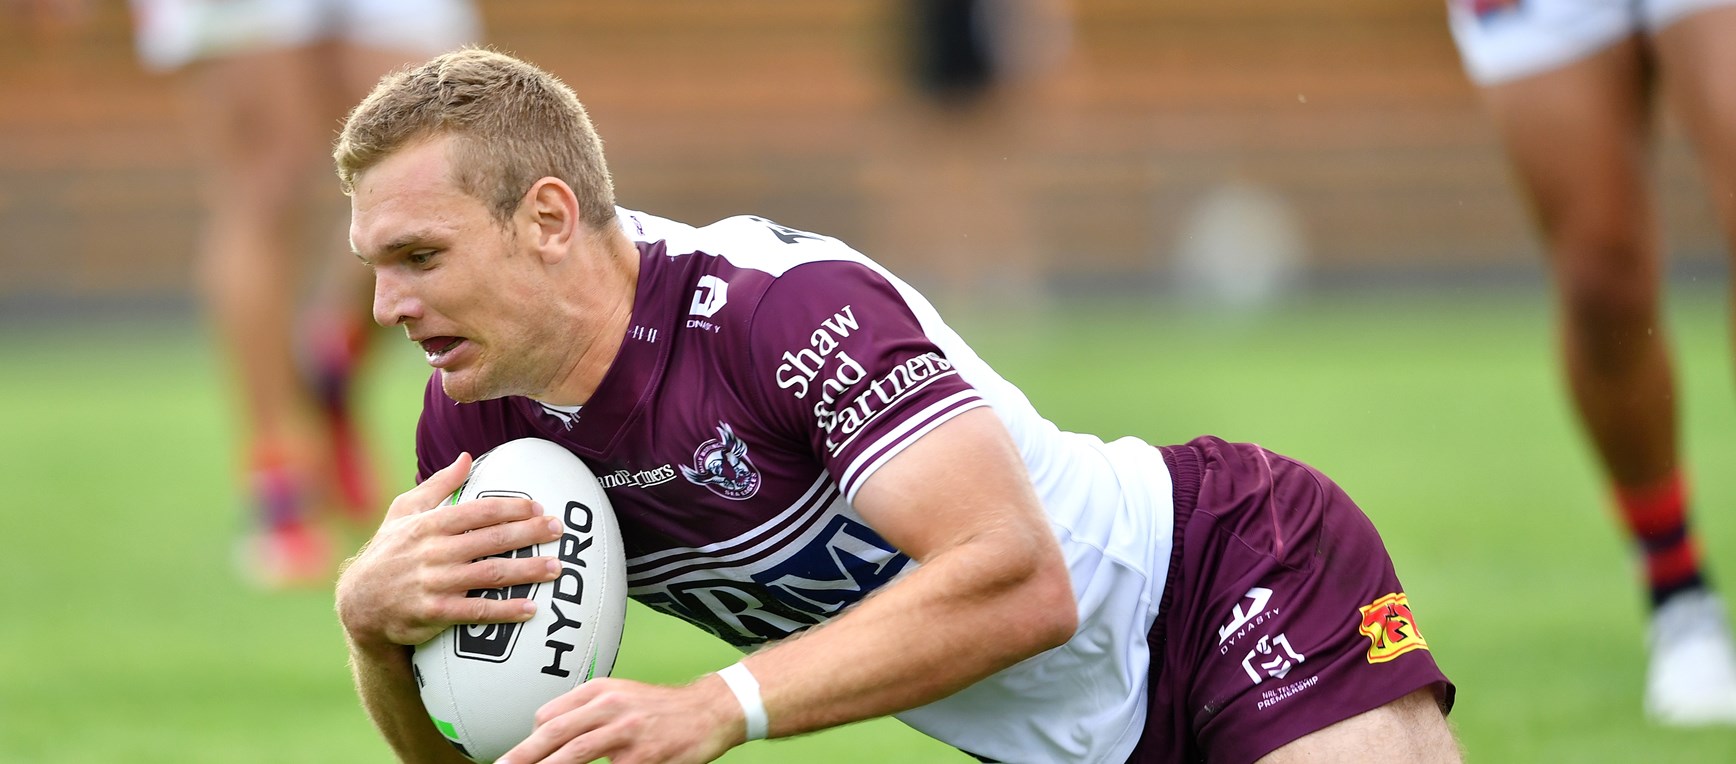 In pics: Sea Eagles win over the Roosters